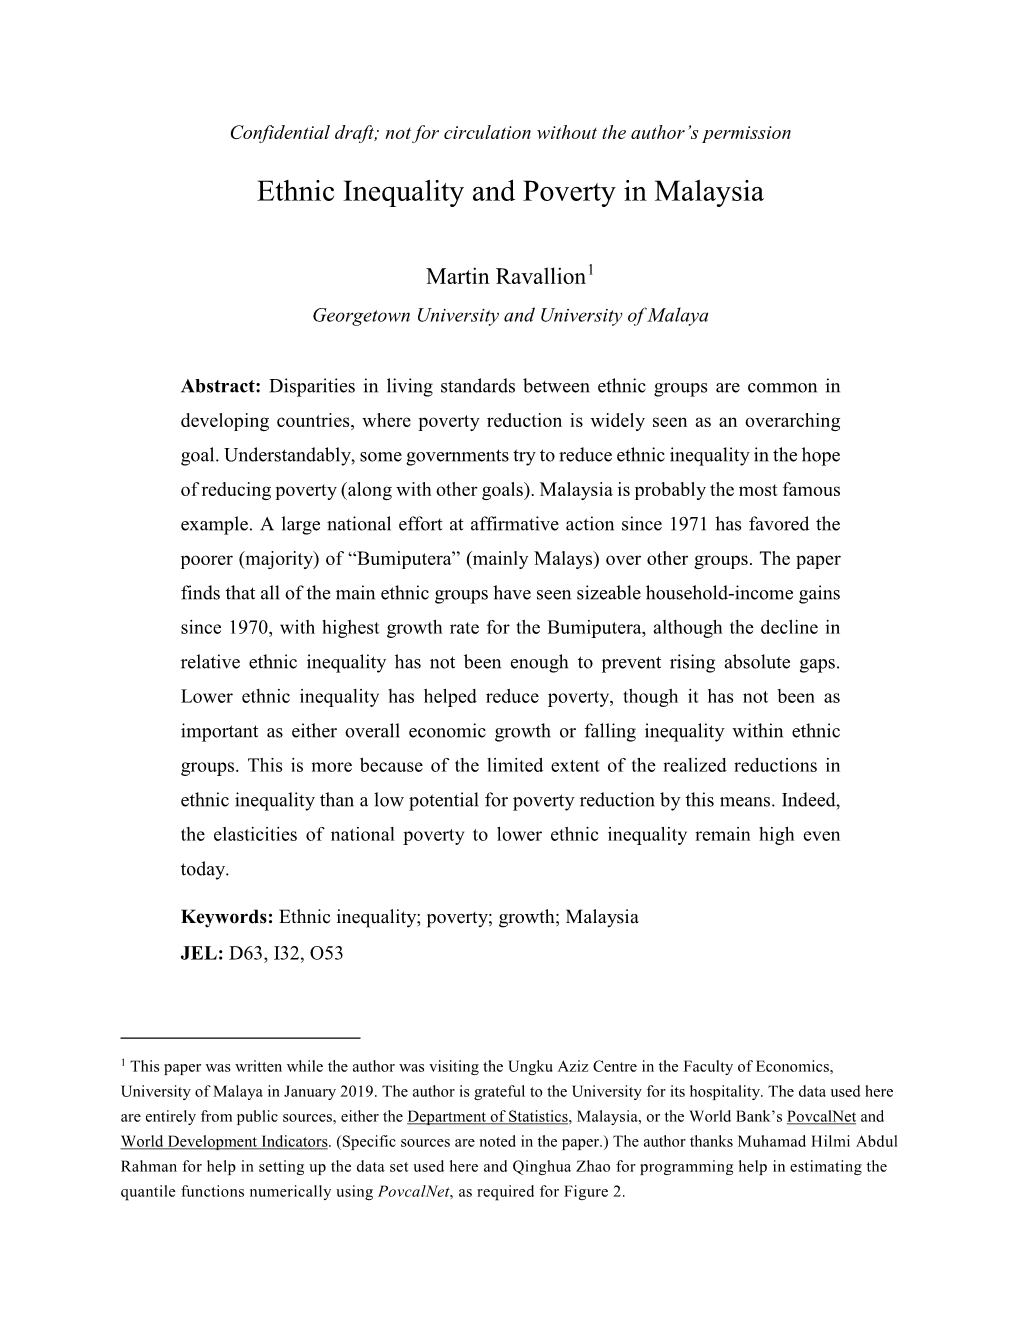 Ethnic Inequality and Poverty in Malaysia